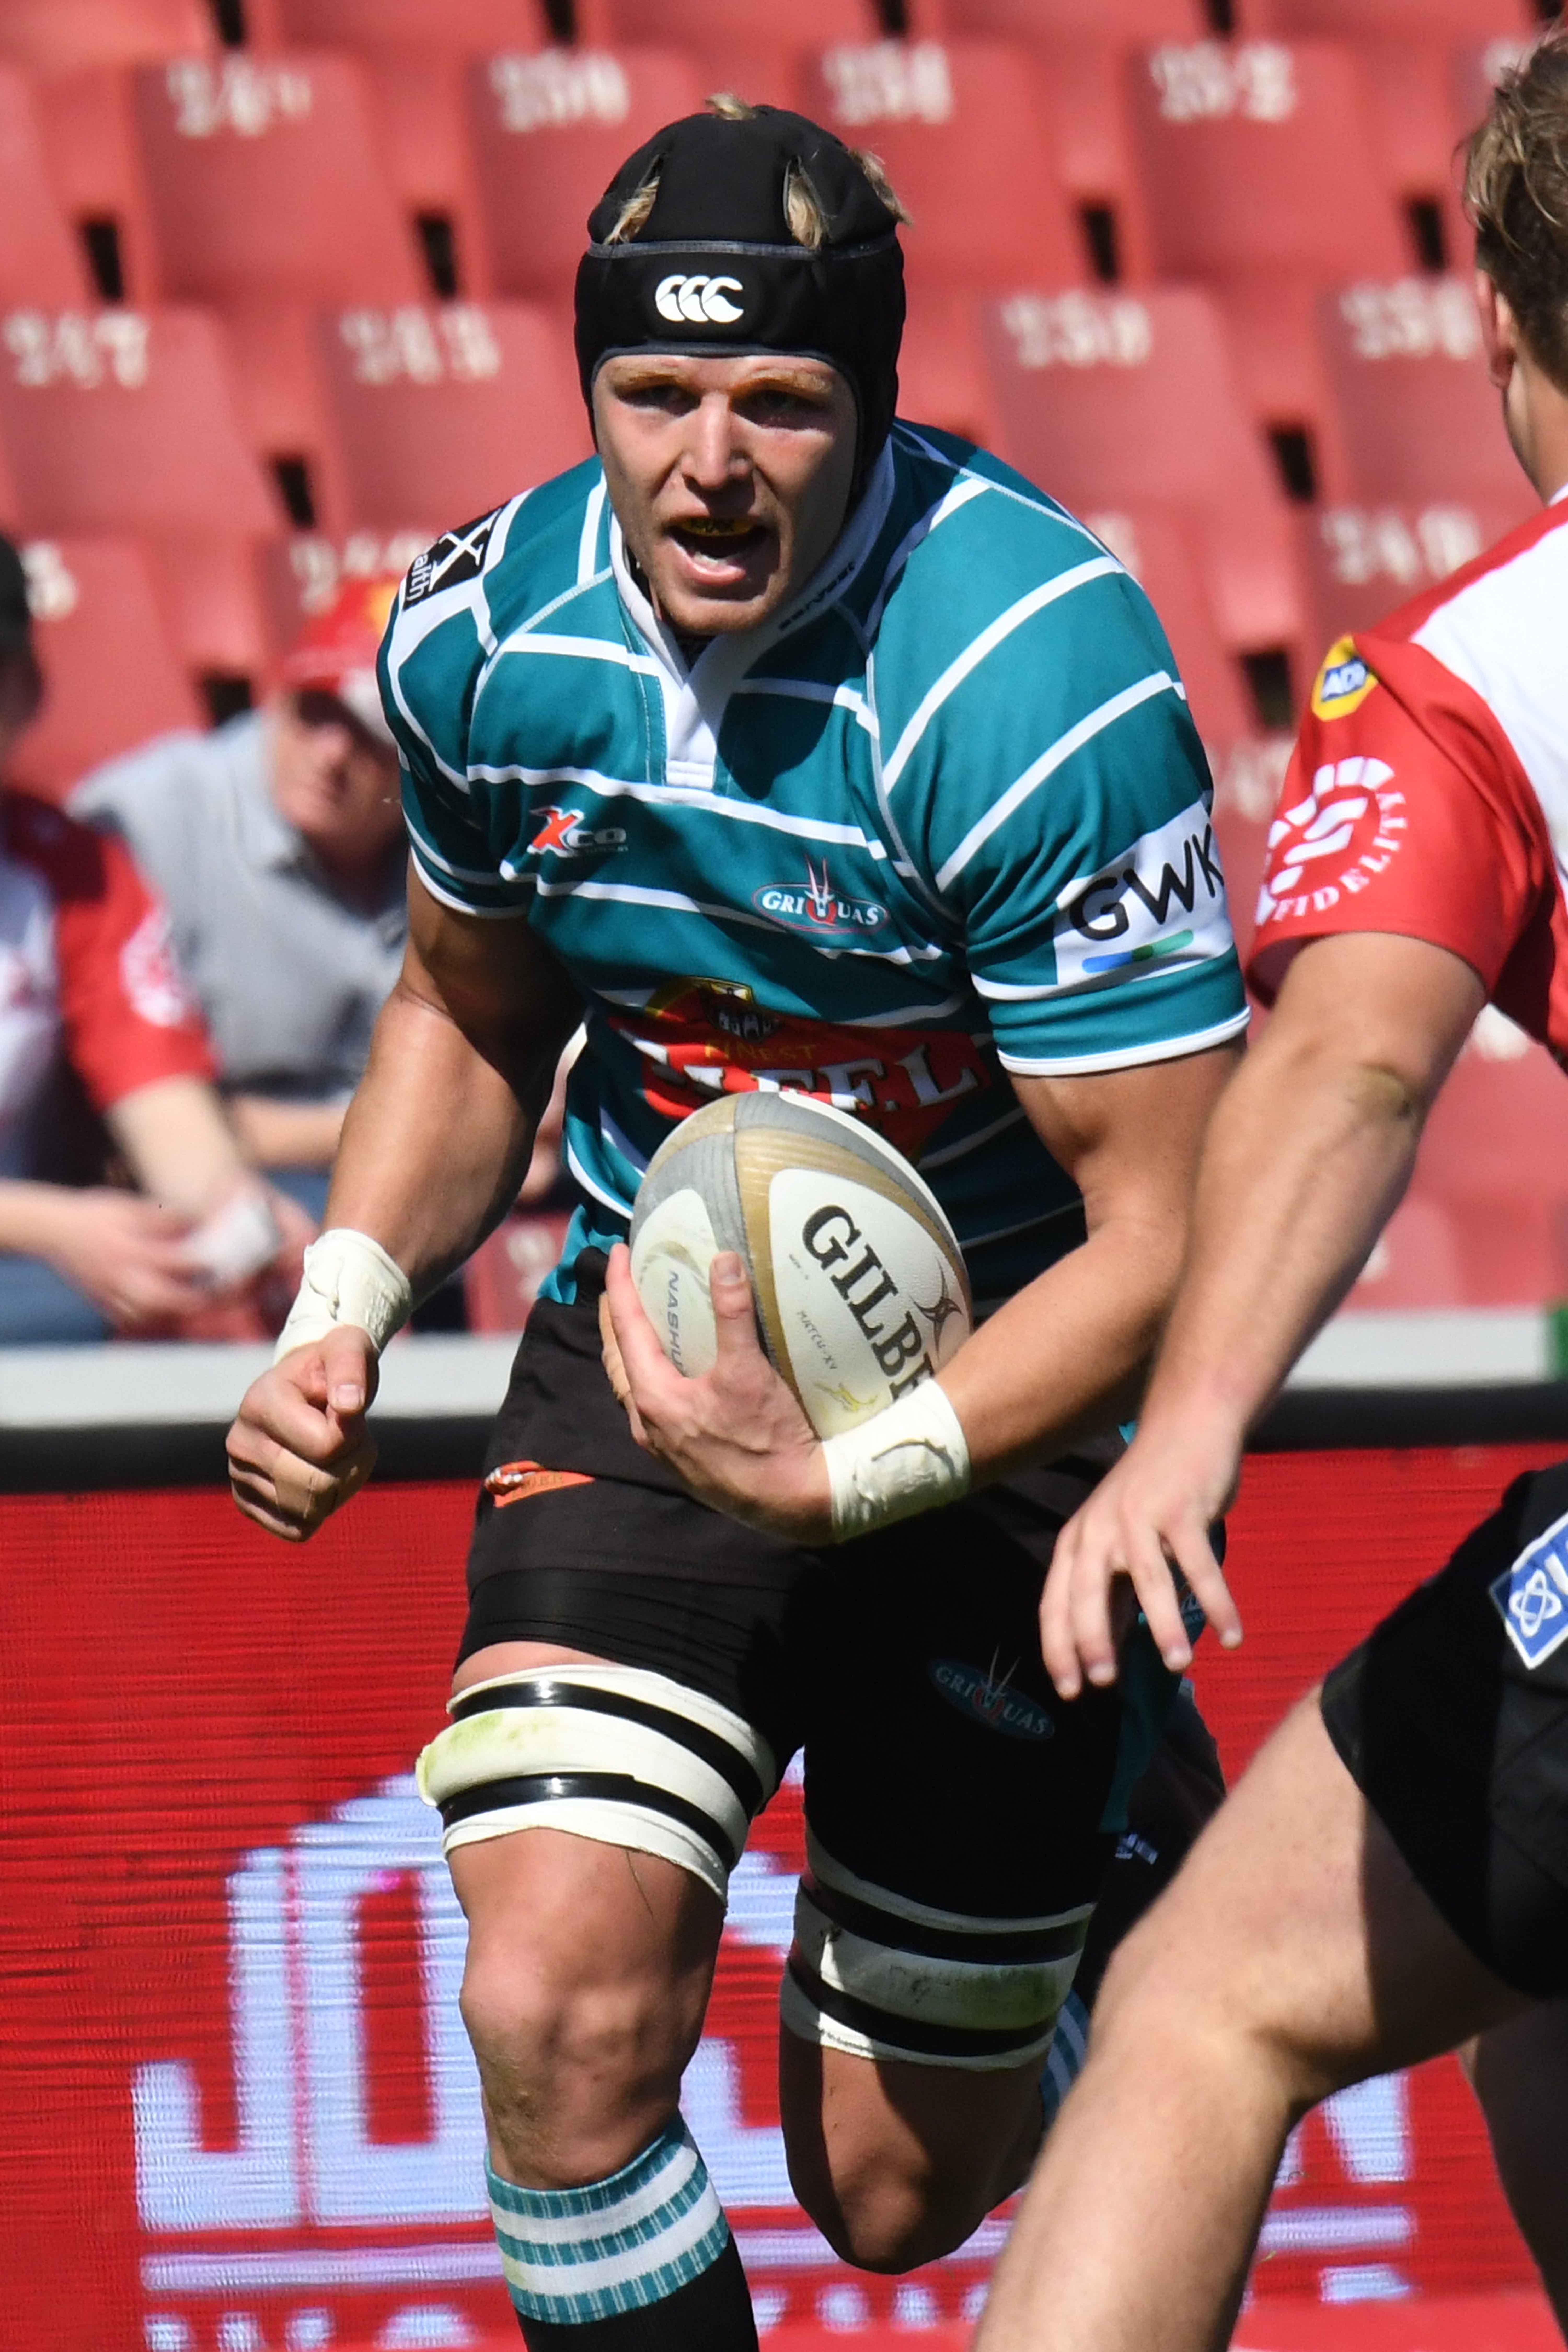 Engledow: Griquas need to work on conditioning